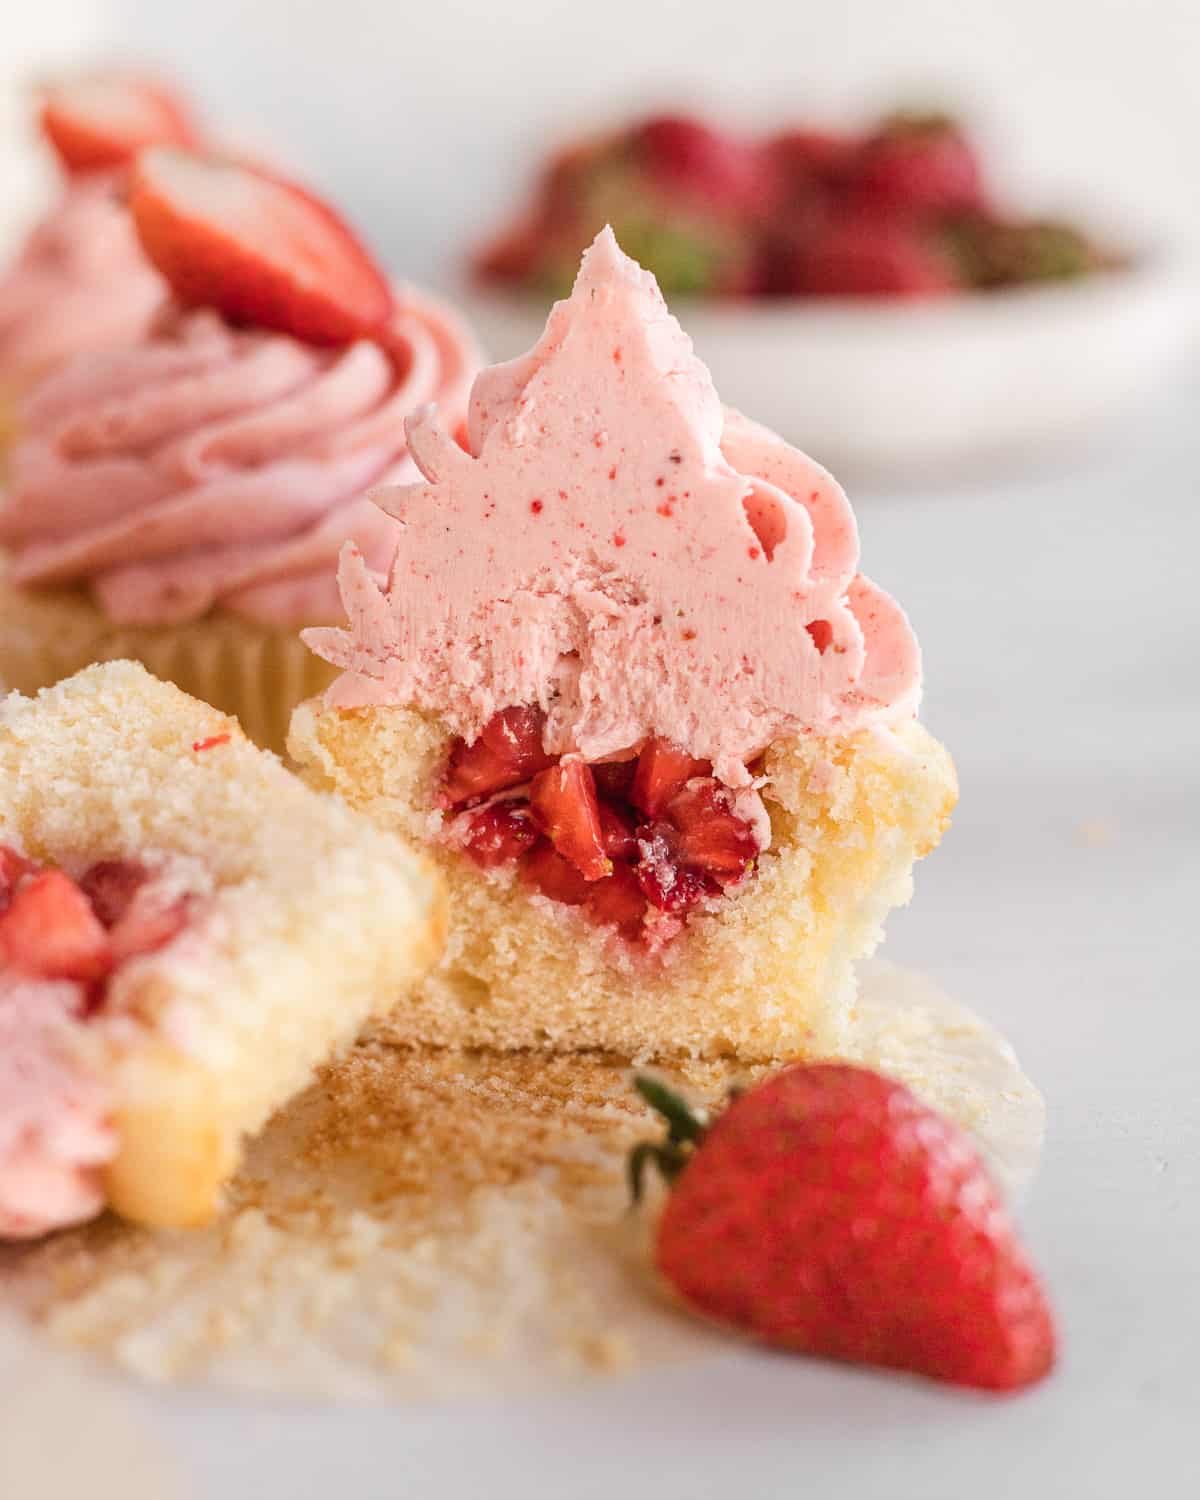 strawberry cupcake cut in half so you can see the filled insides with strawberries. 